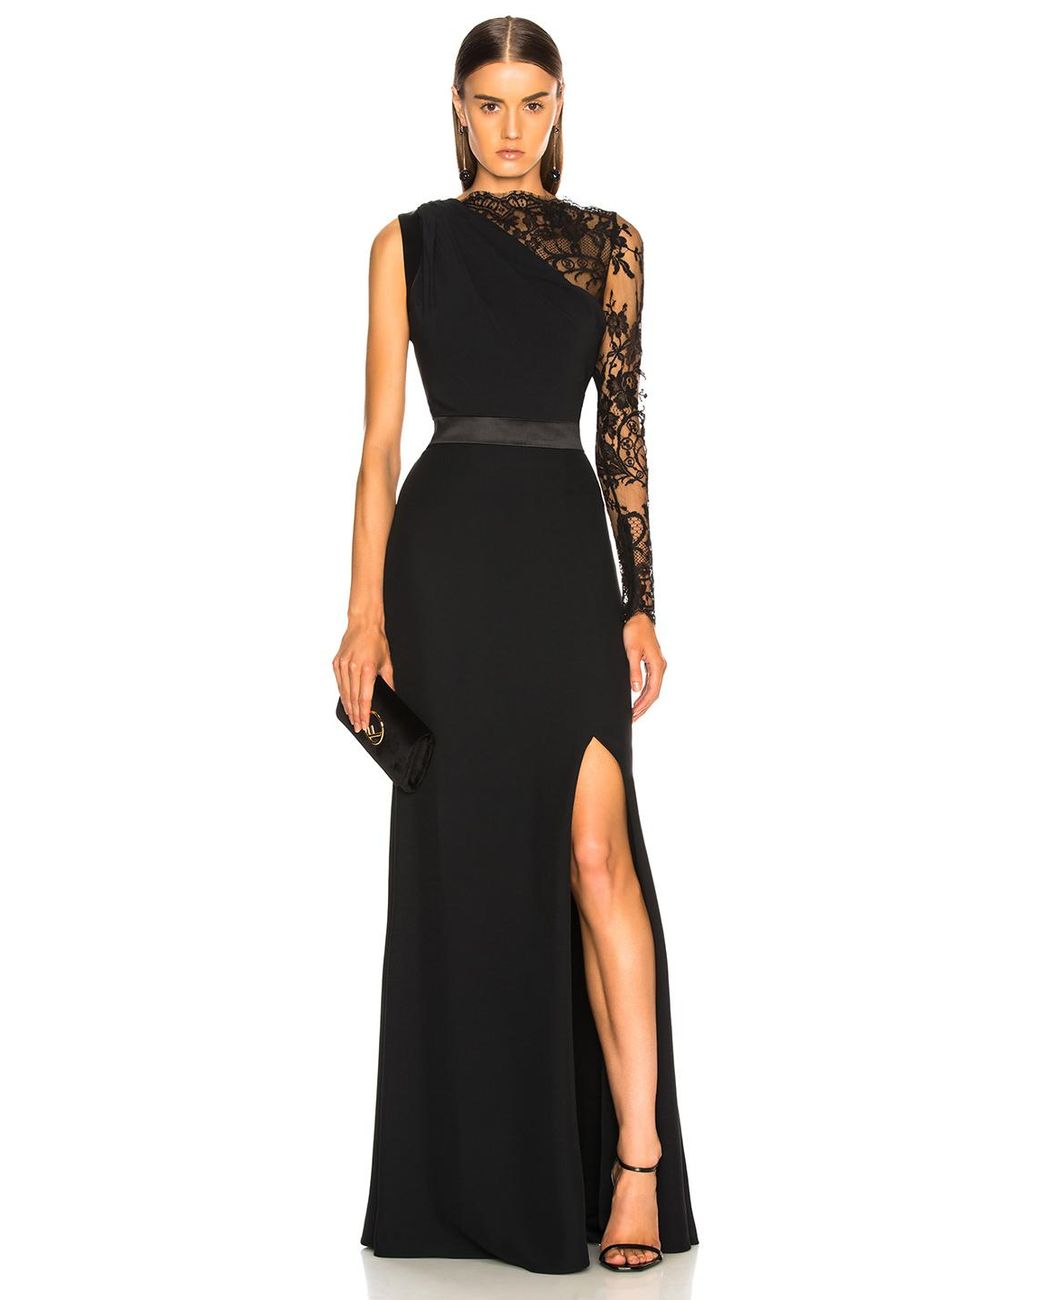 Black Lace Dress  Buy Black Lace Dress online in India